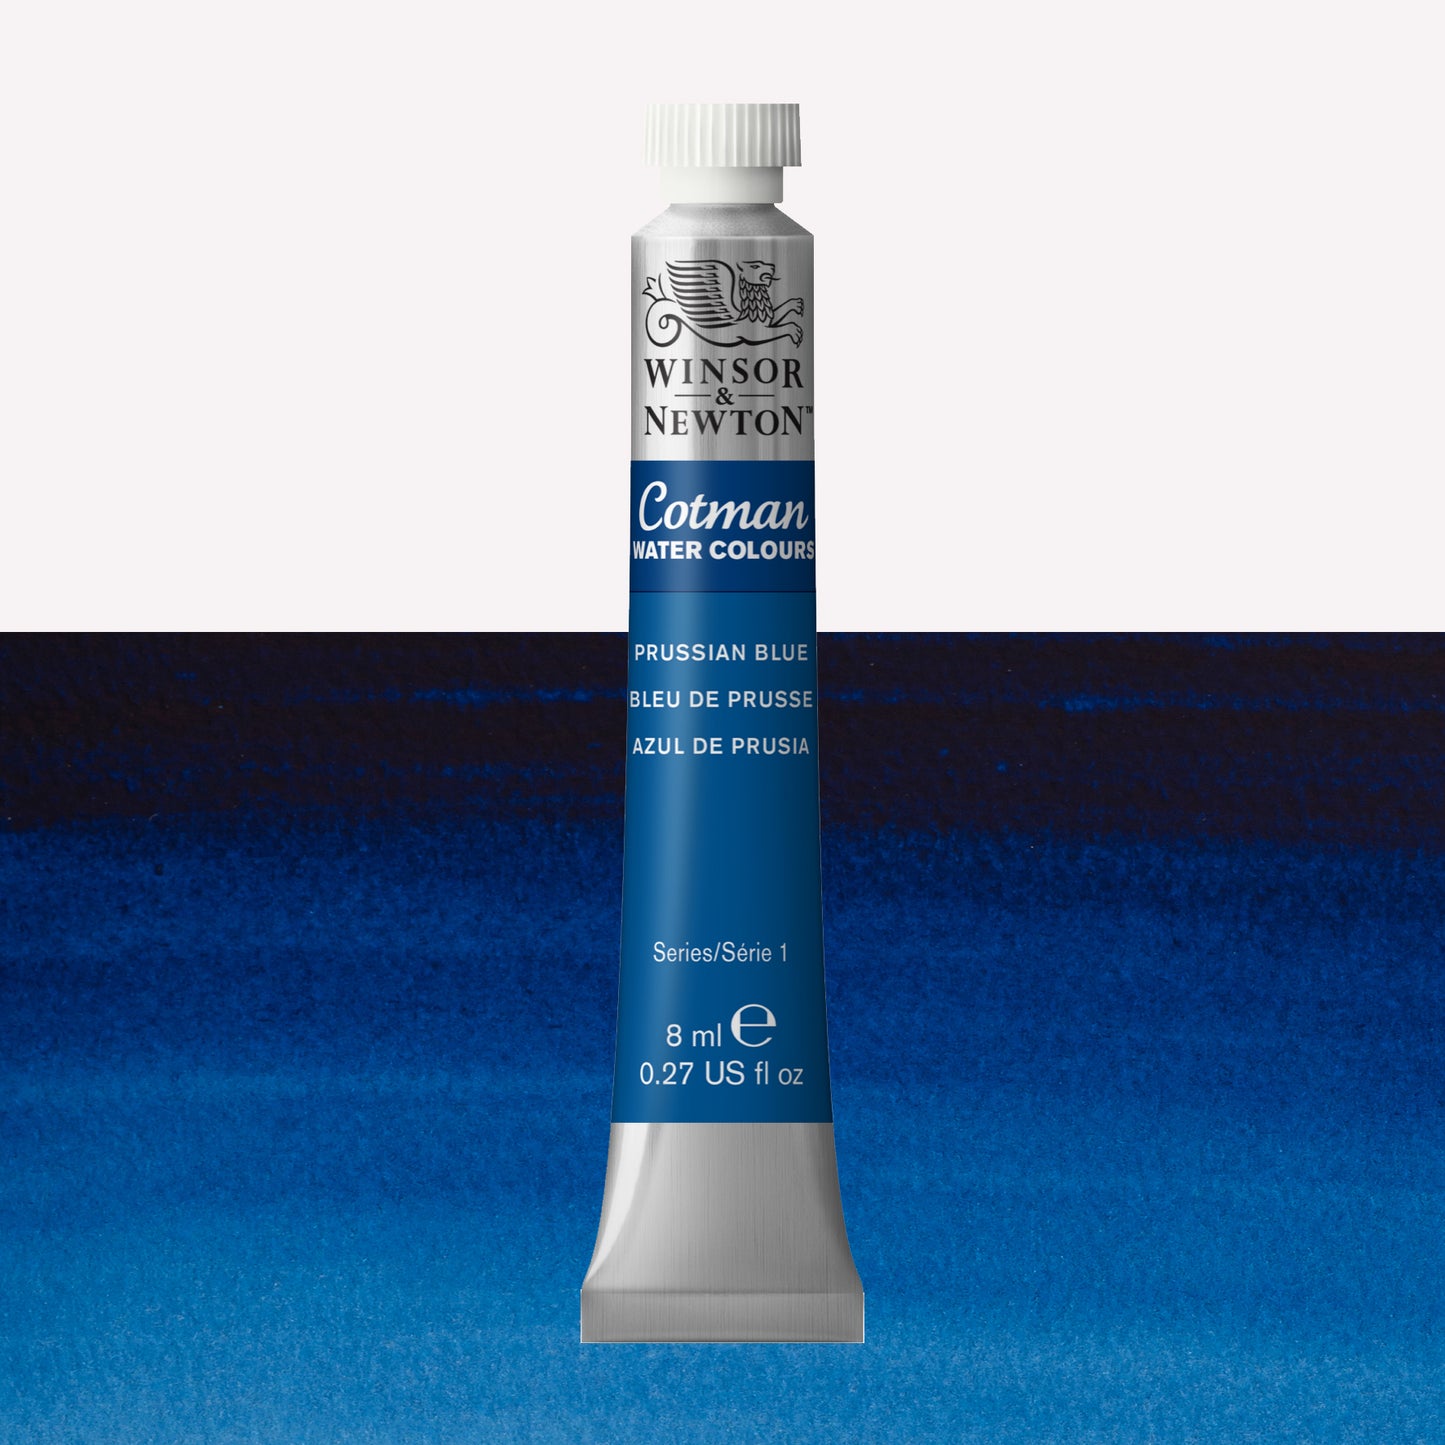 Winsor & Newton Cotman watercolour paint packaged in 8ml silver tube with a white lid in the shade Prussian Blue over a highly pigmented colour swatch.